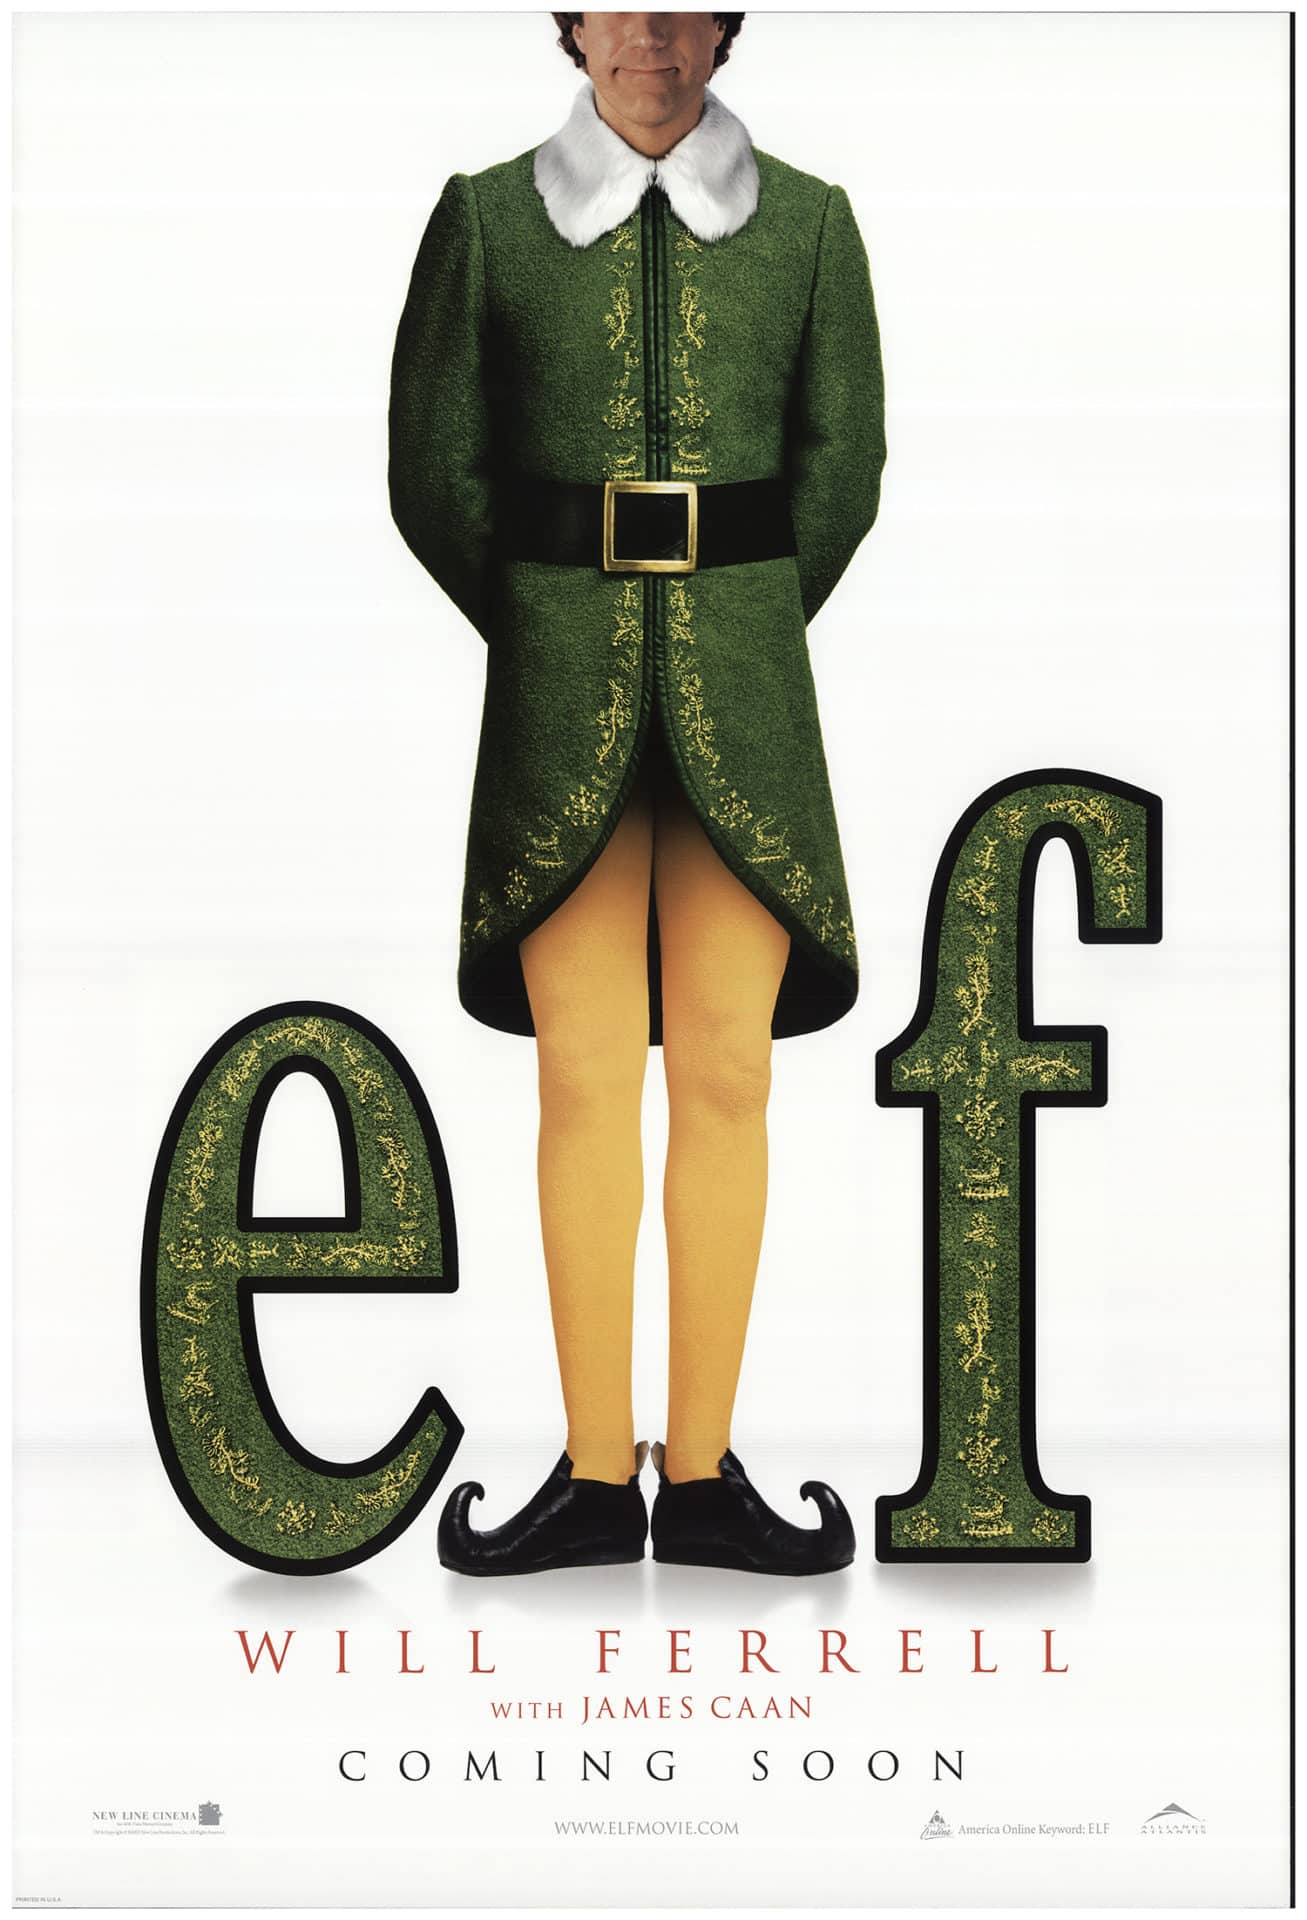 movie review of elf